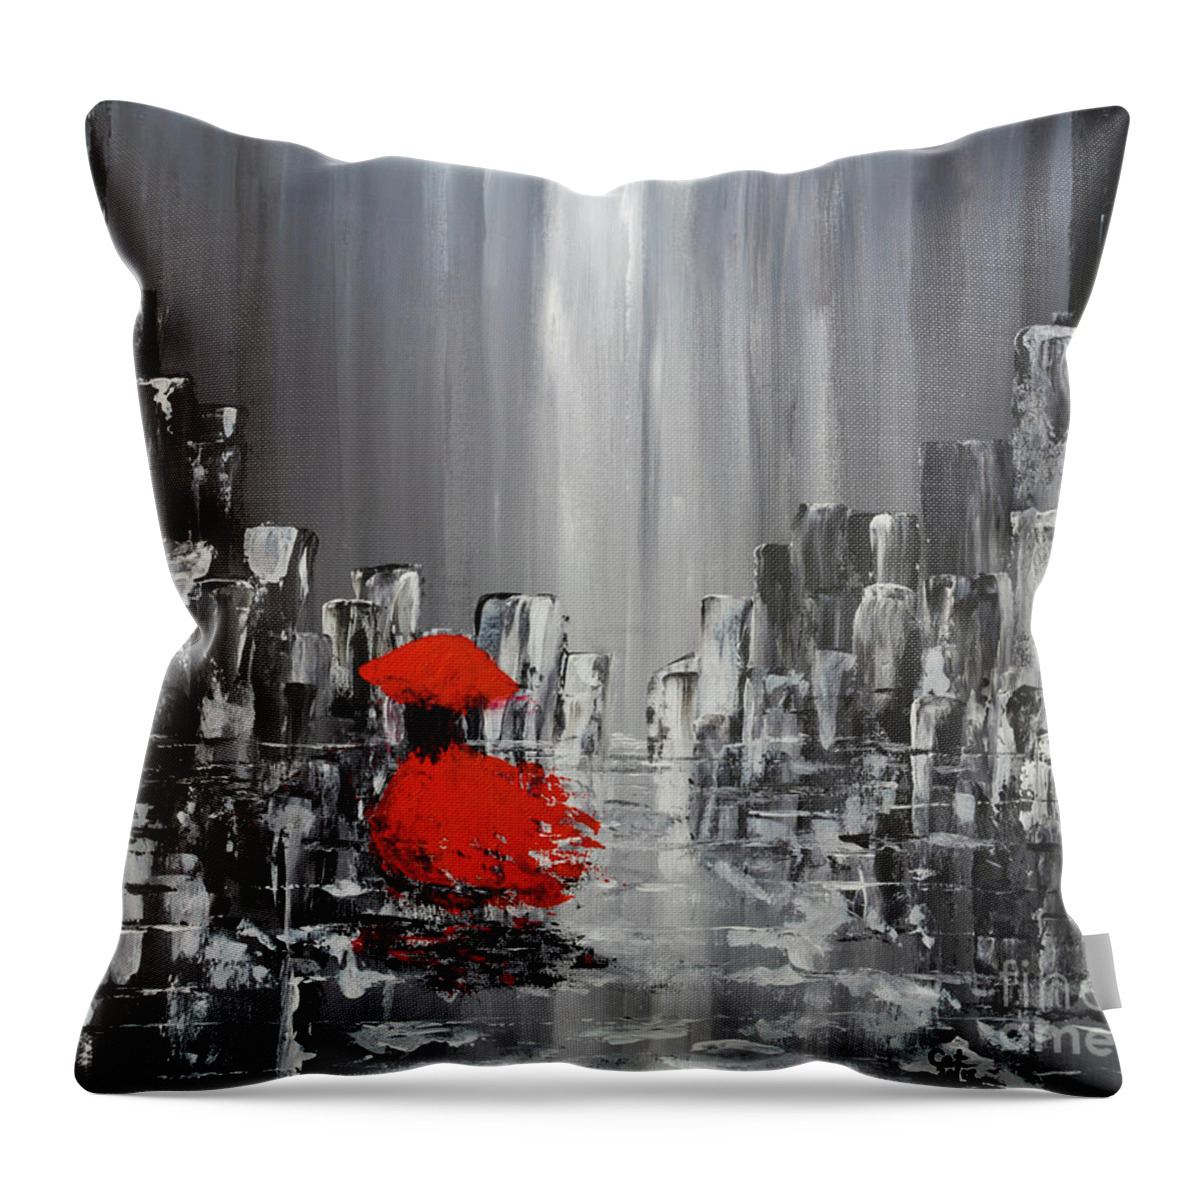 Abstract Painting Throw Pillow featuring the painting Rainy Day City Girl In Red by Catalina Walker